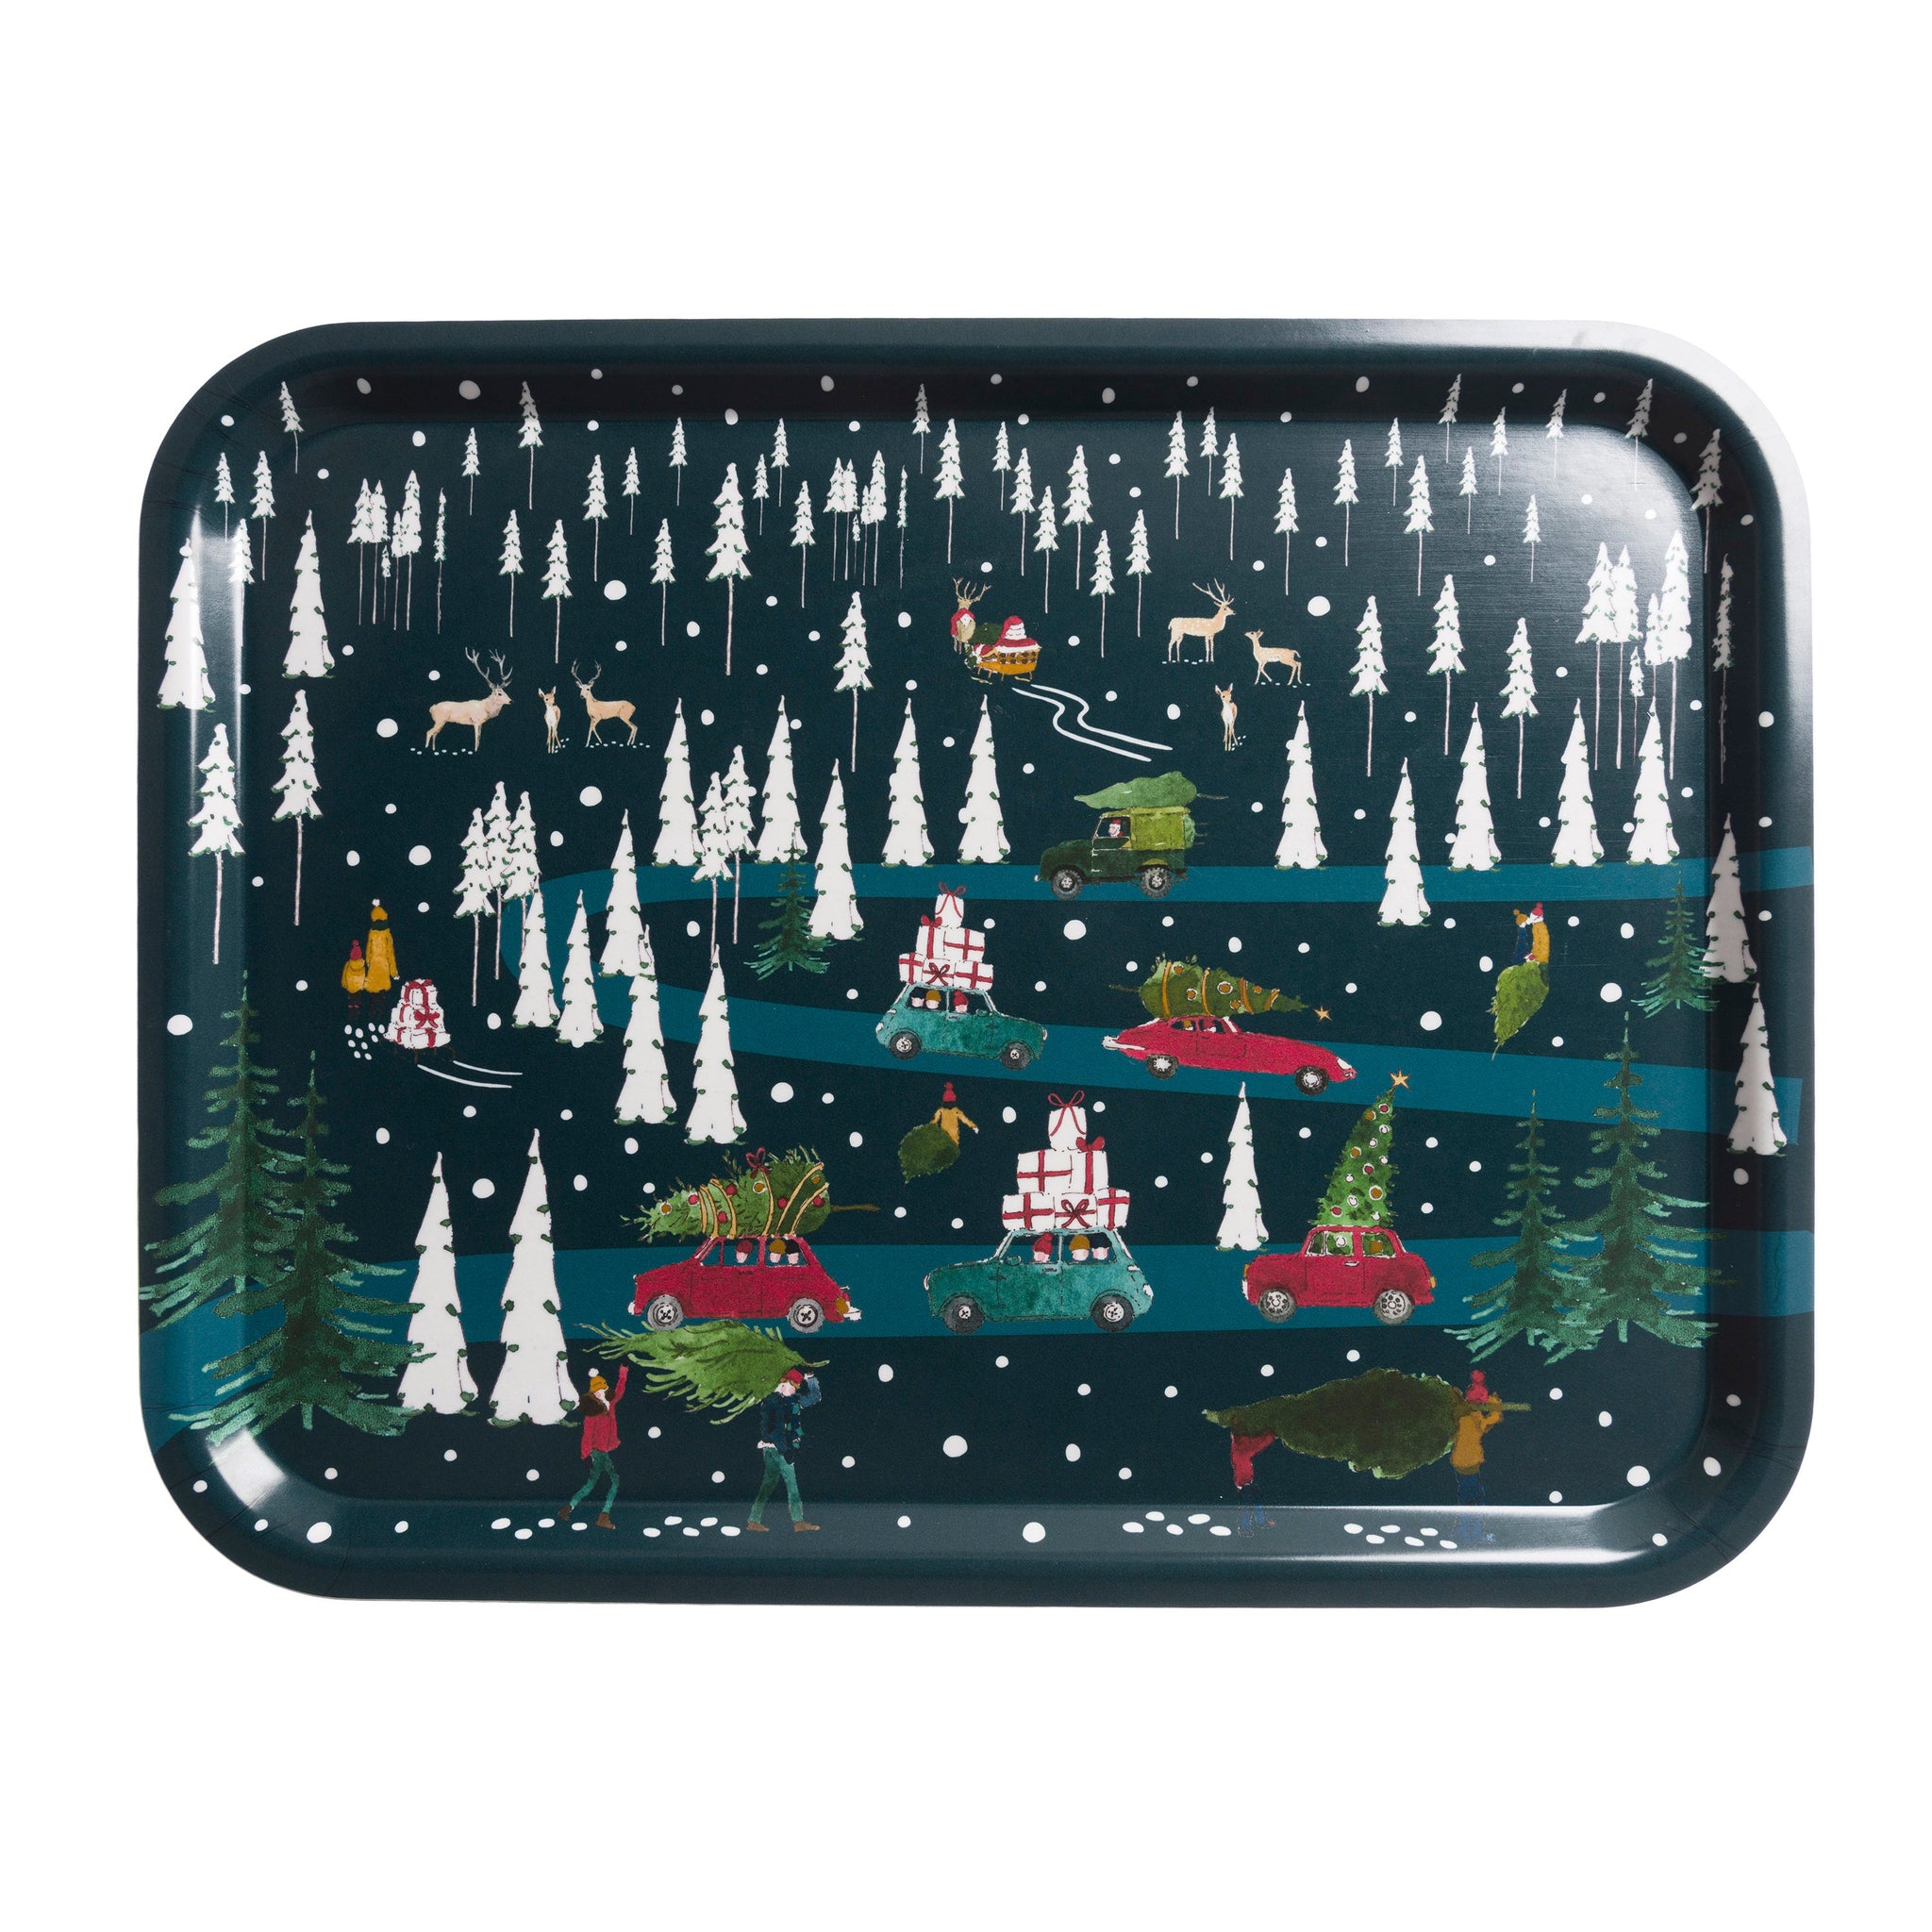 Home for Christmas Serving Tray - Large